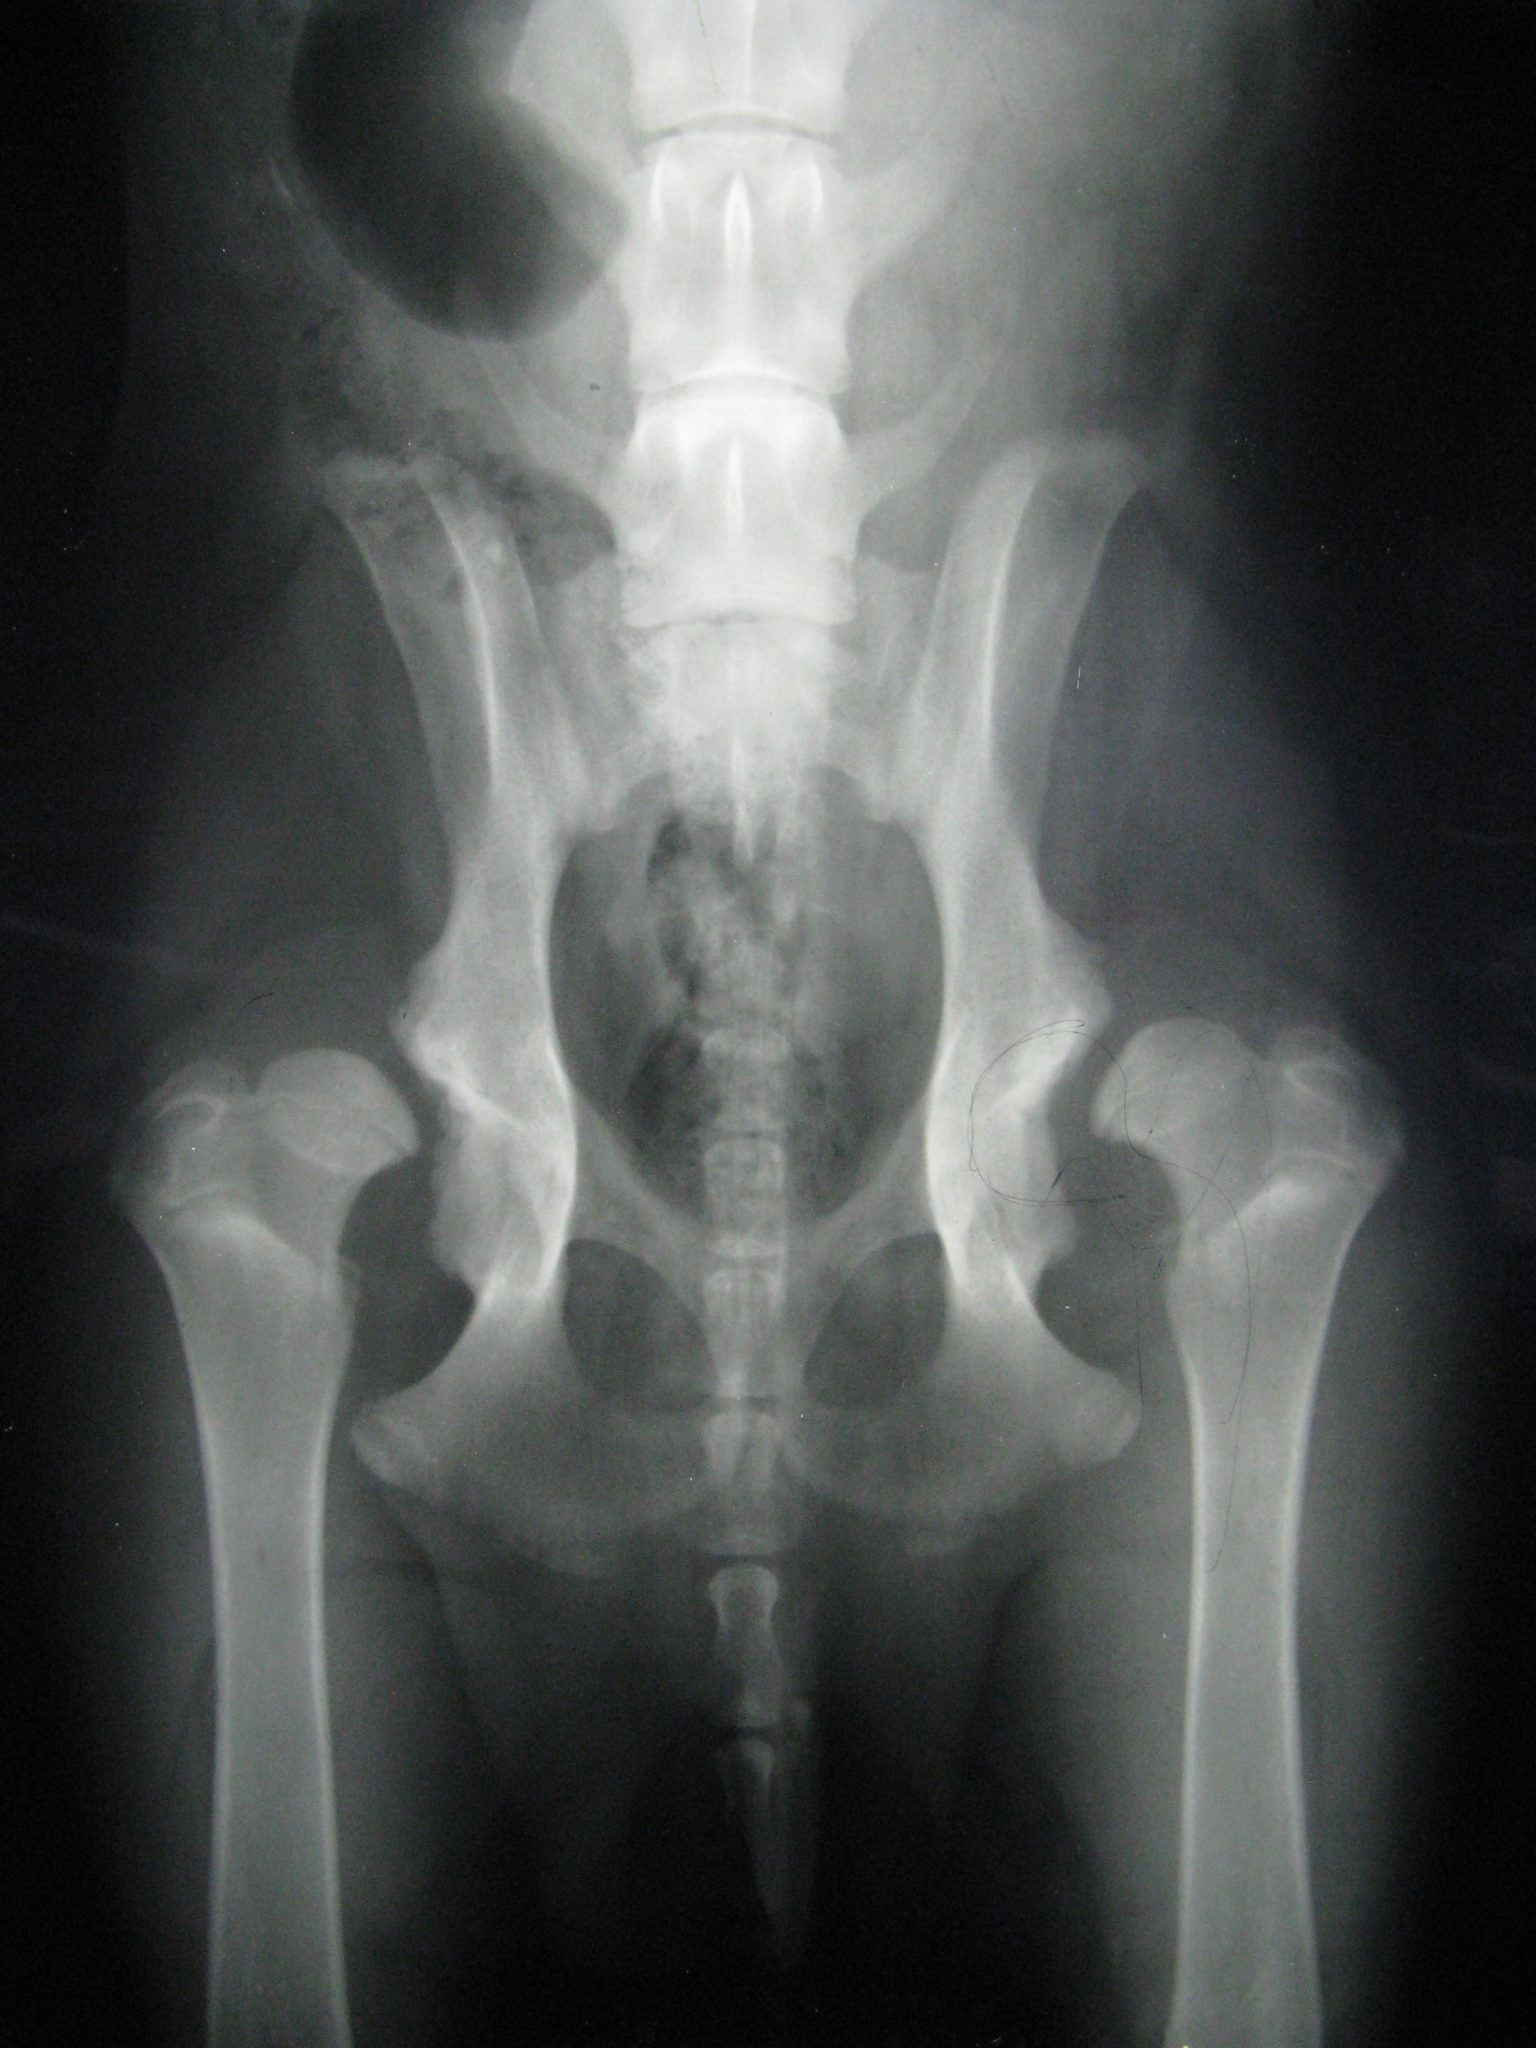 OFA Certification and Hip Dysplasia In Dogs